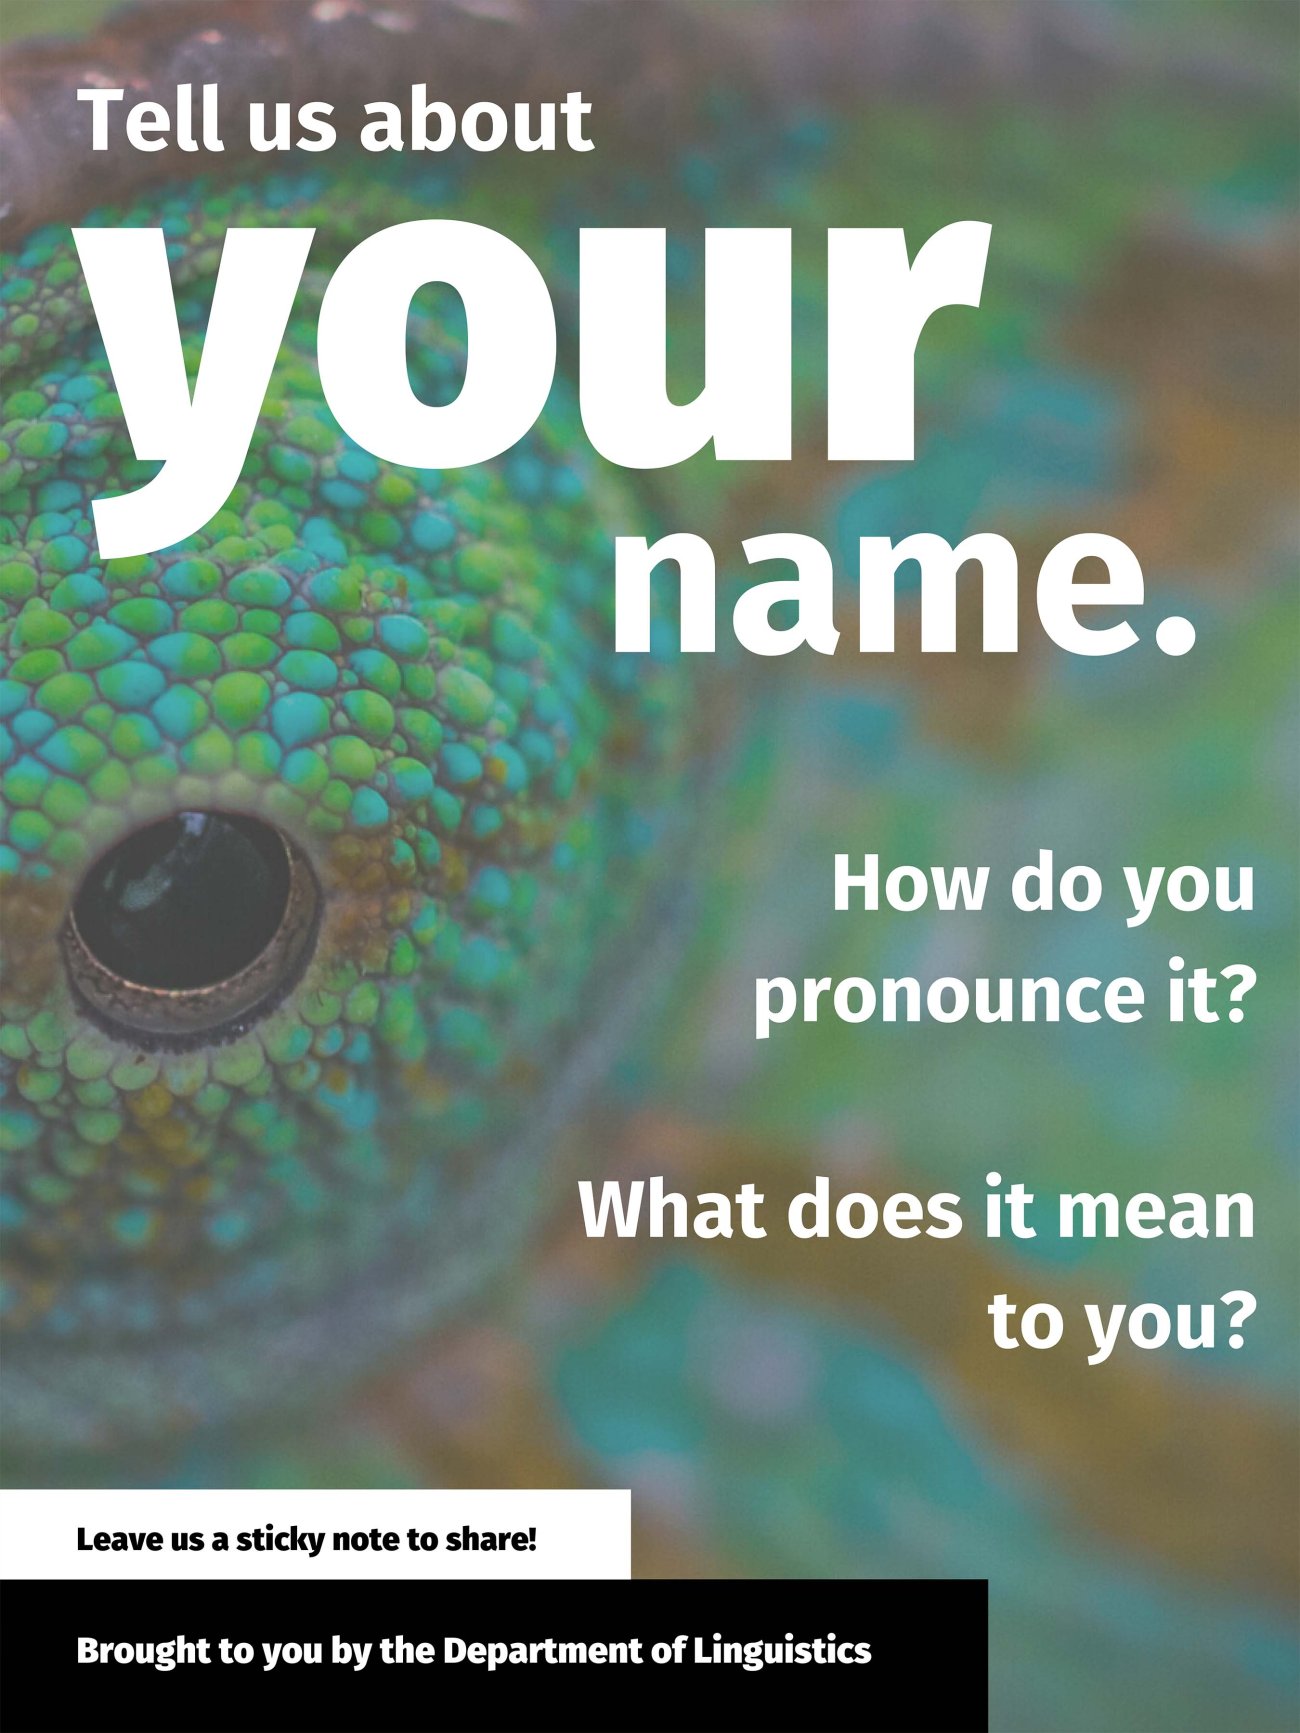 Tell us about your name. Click on image to see full description.